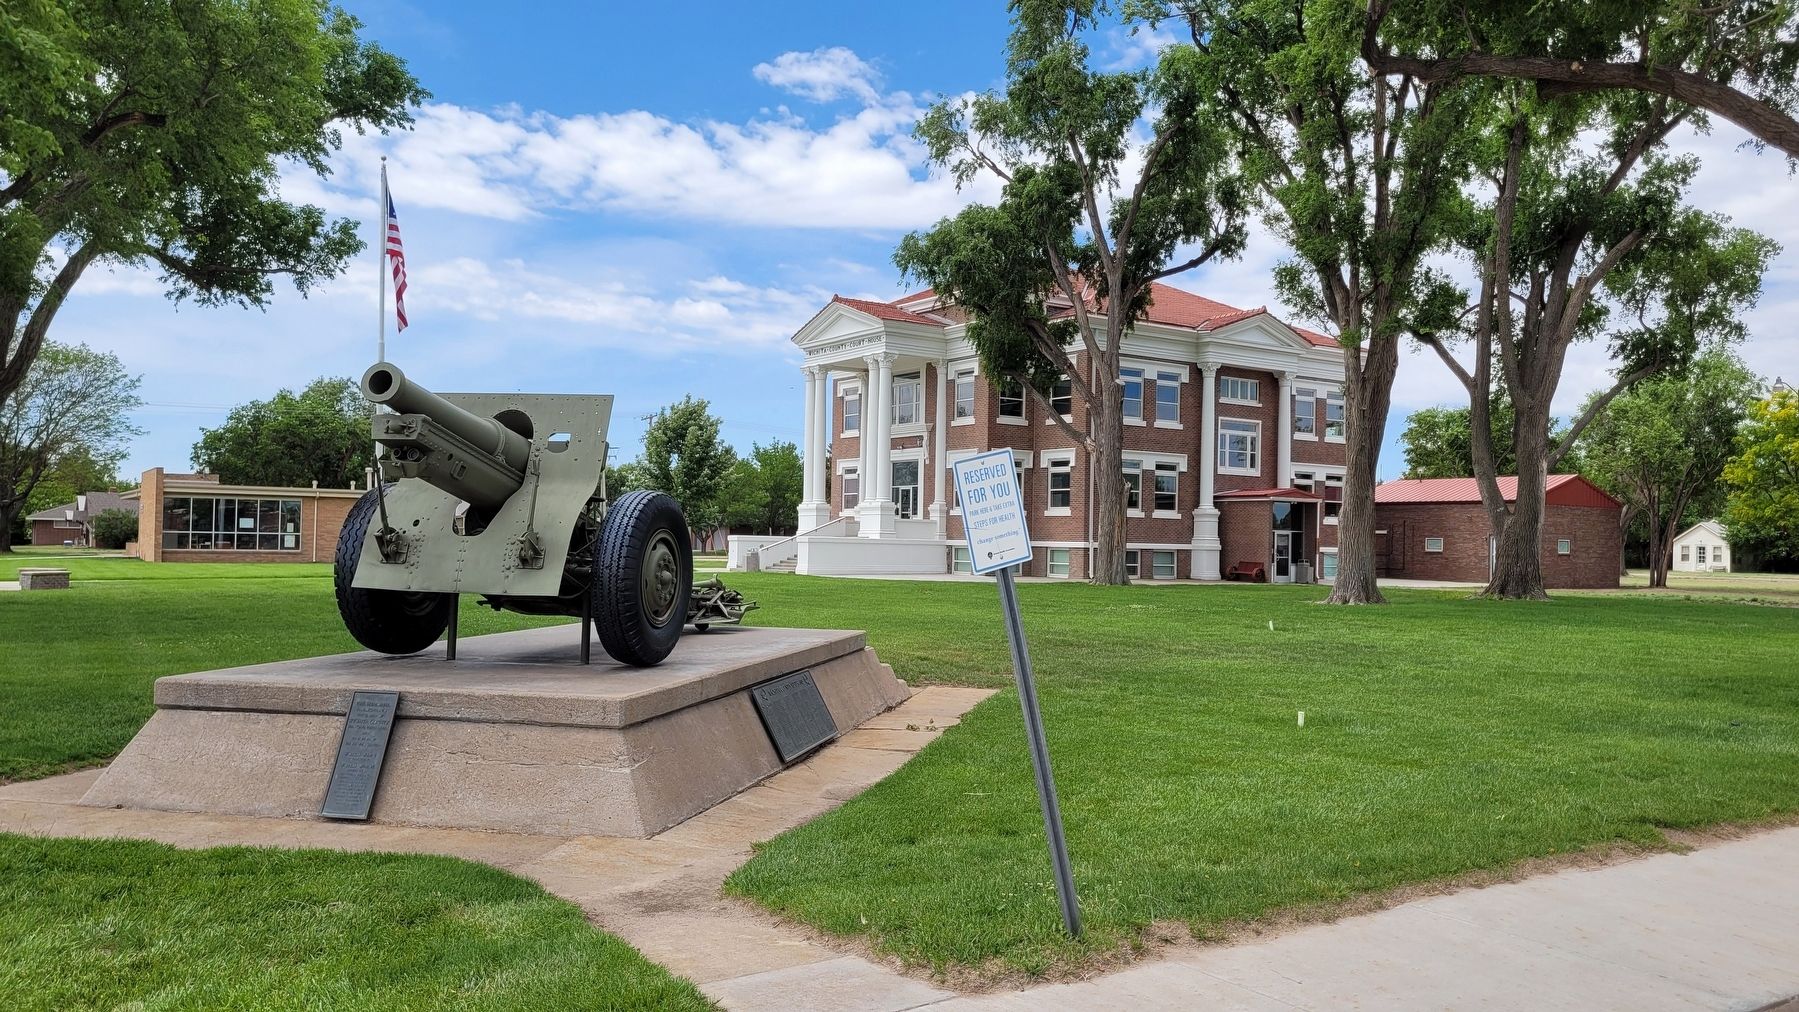 The 2nd Wichita County Veterans Marker is on the right image. Click for full size.